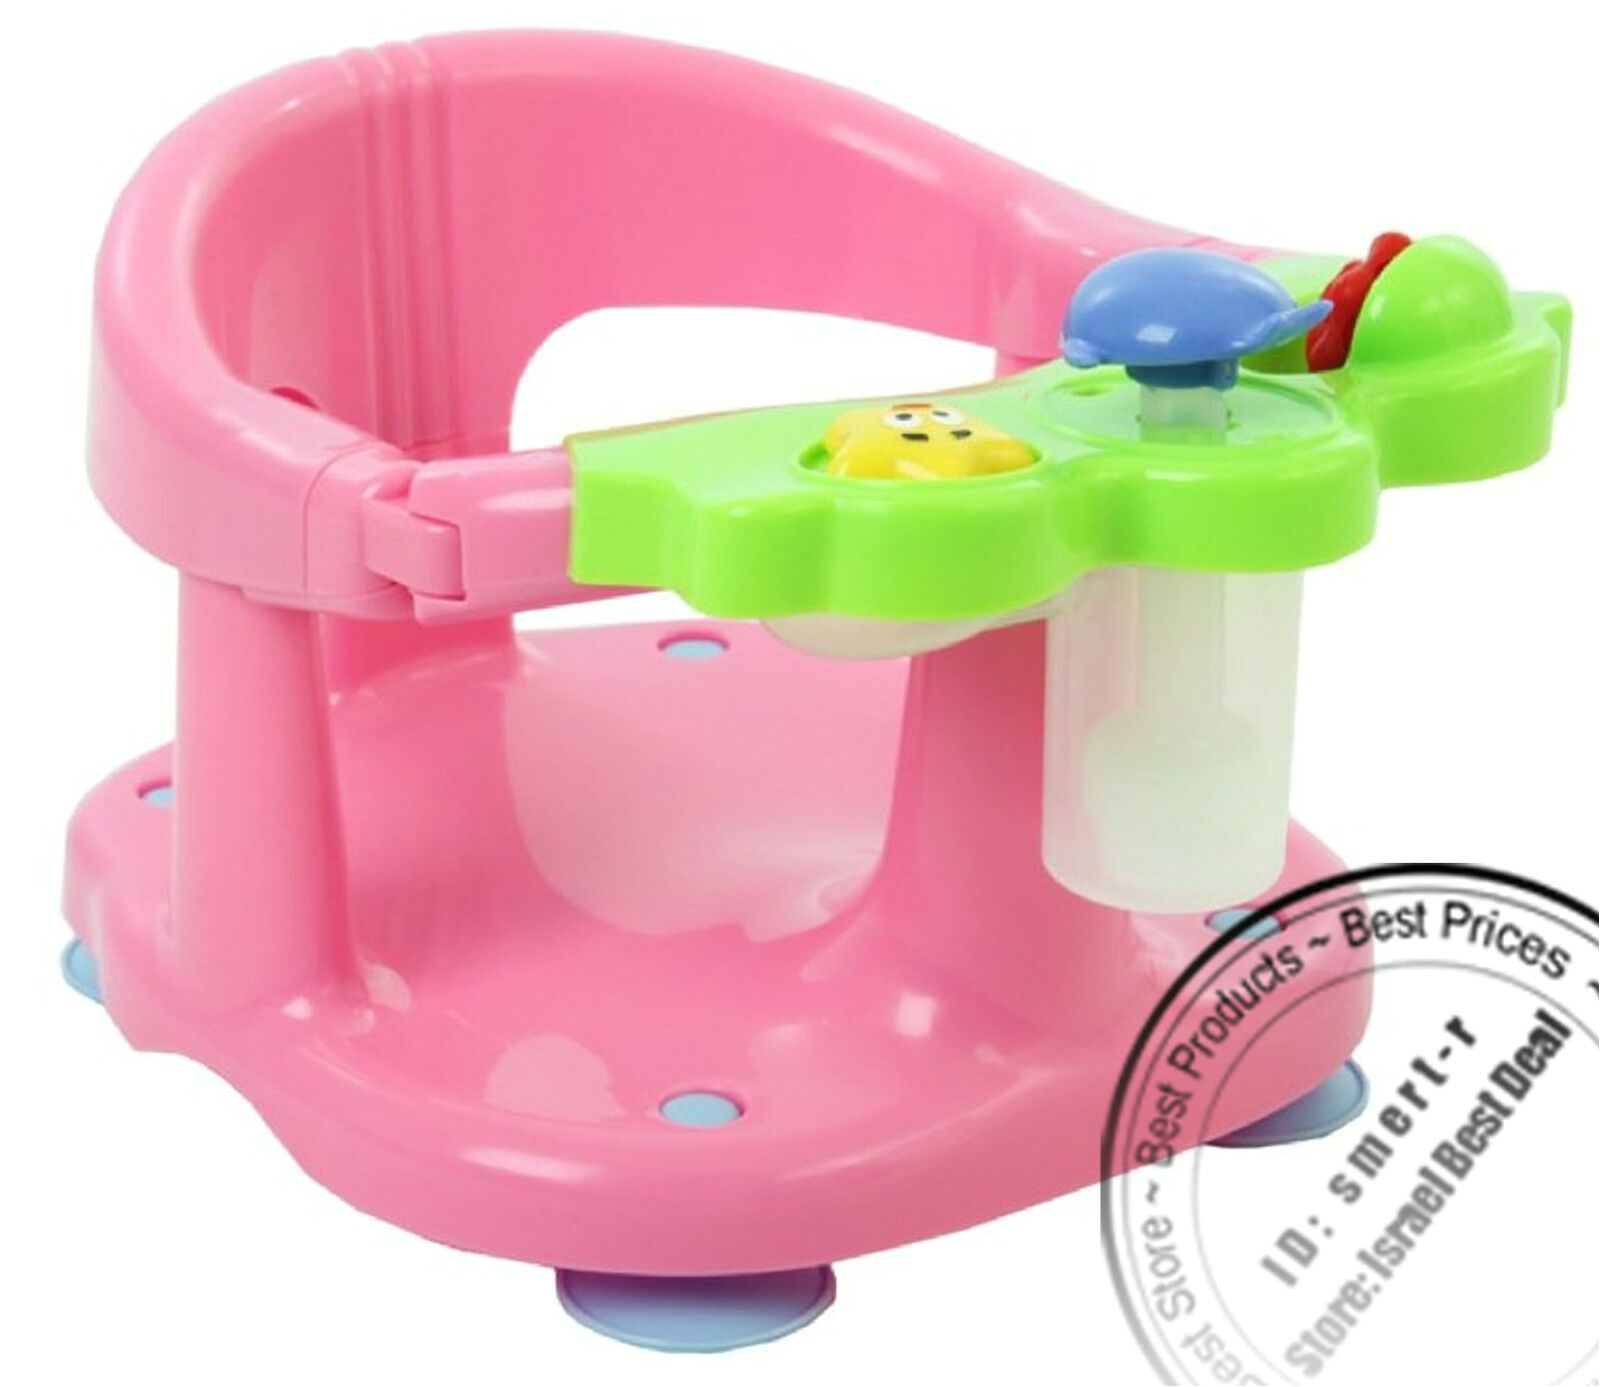 Baby Bath Seat with Suction Cups Baby Bath Ring Seat for Tub by Dream Me for Safe